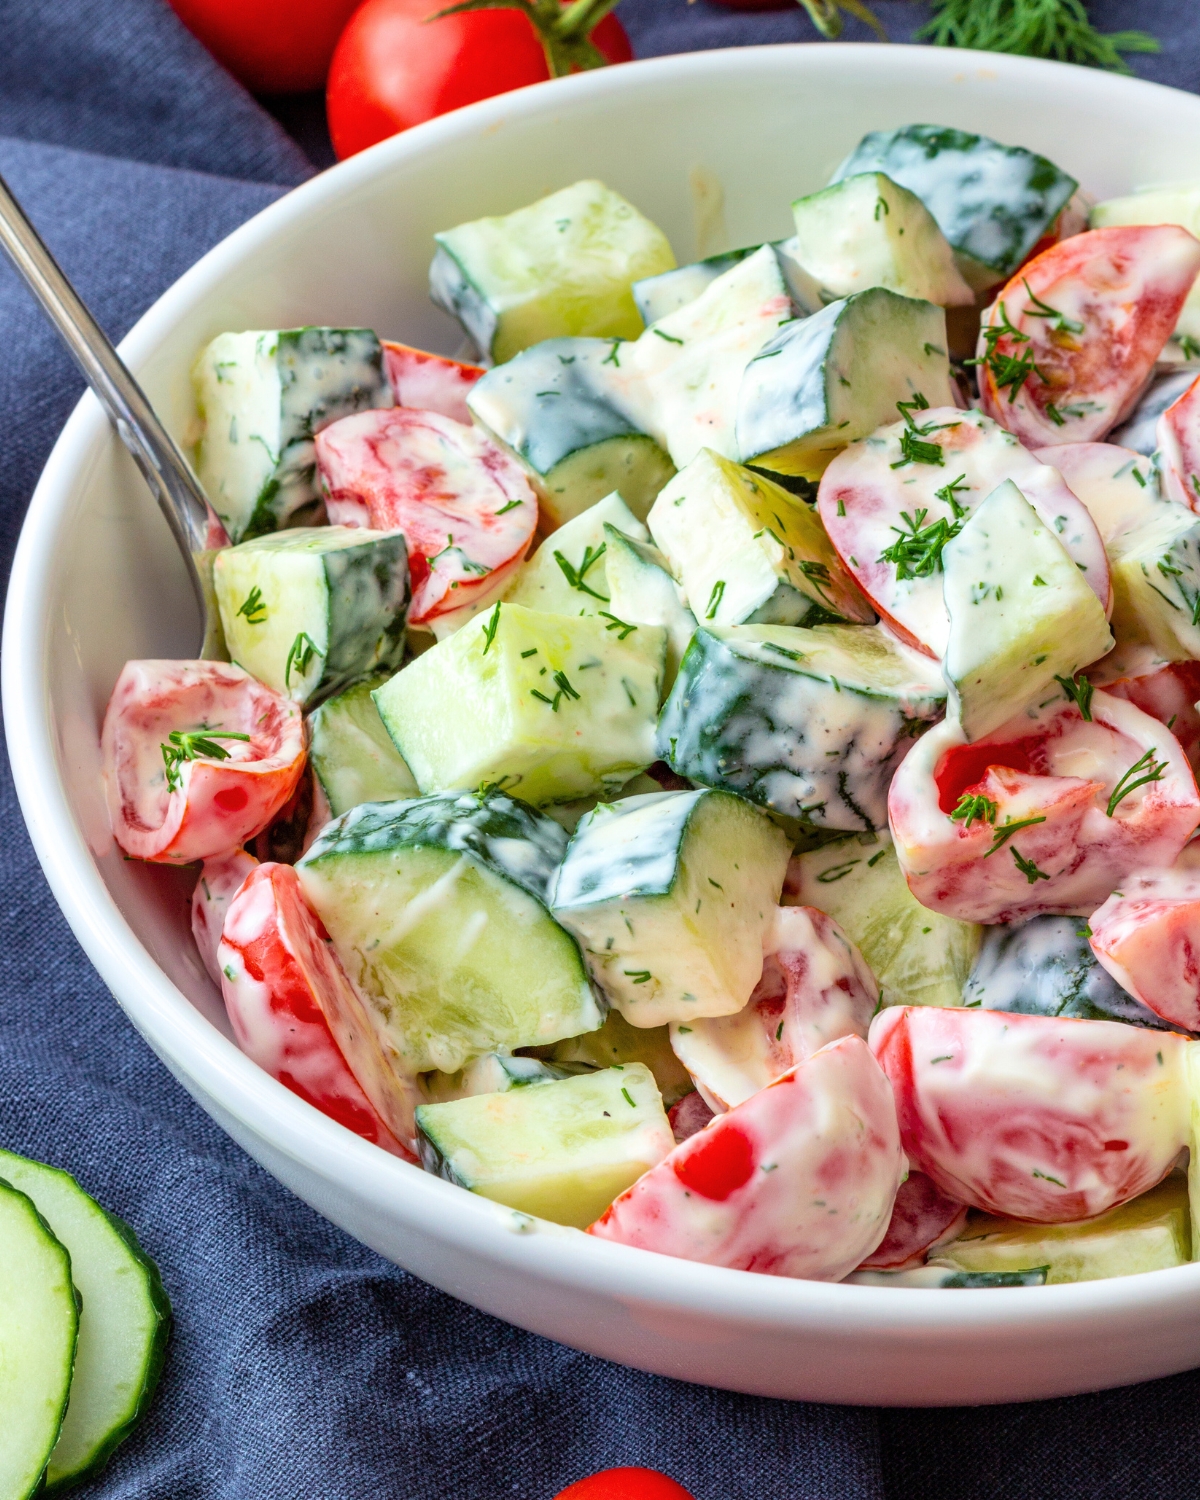 Tomato Cucumber Salad with Creamy Dill Dressing in a white bowl